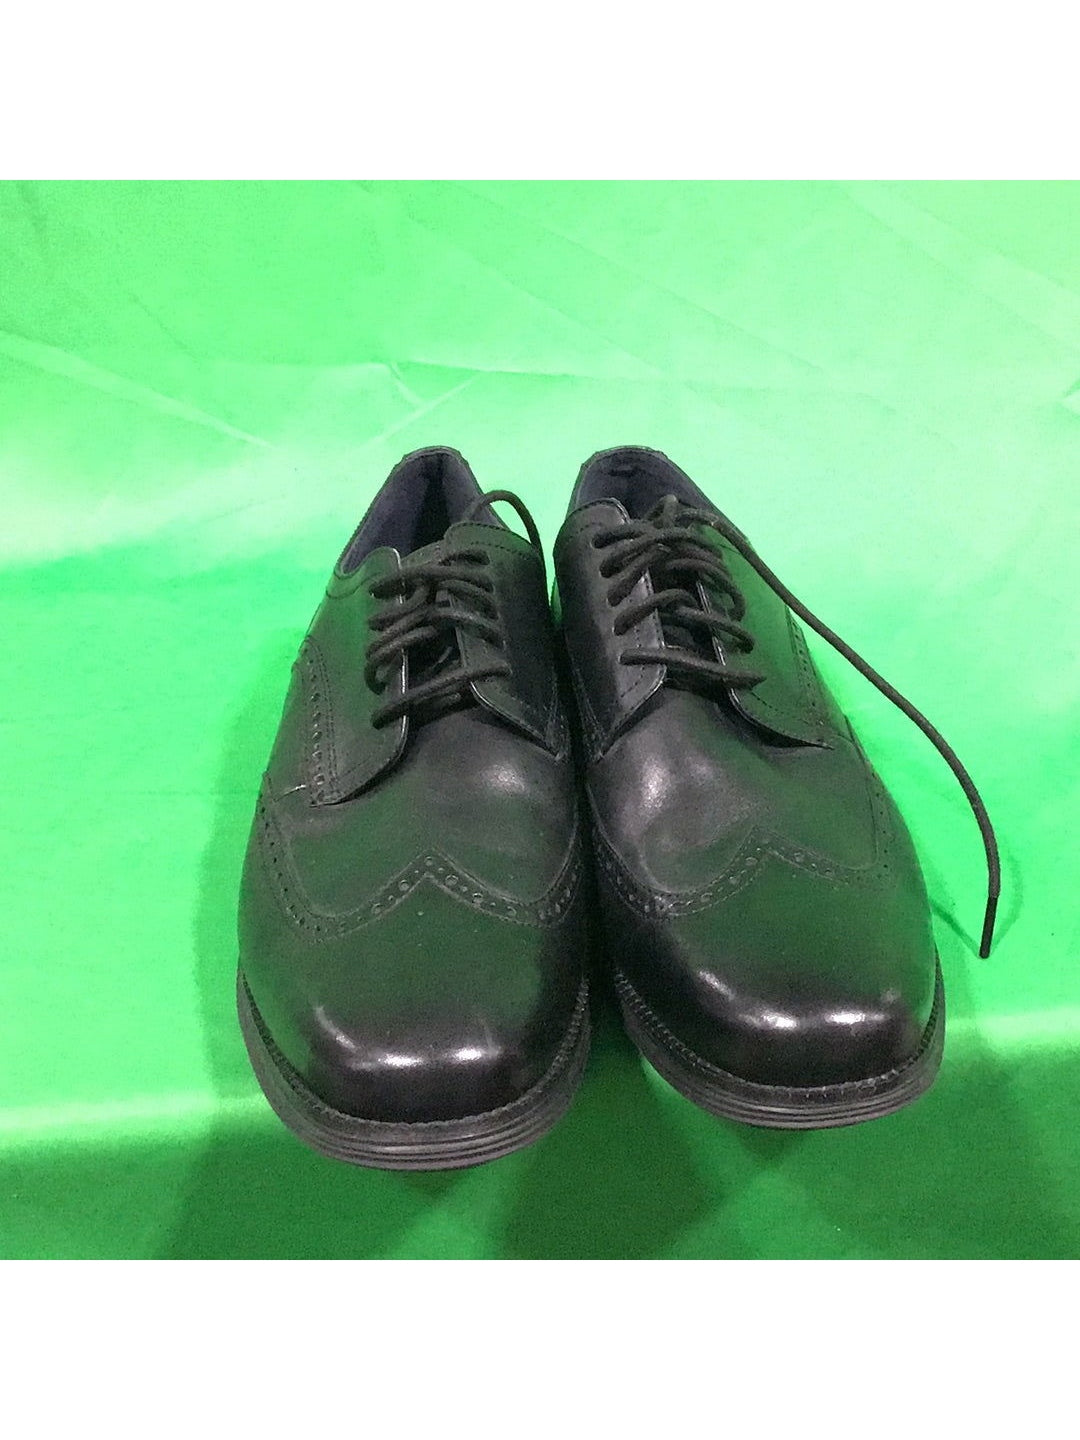 Cole Haan Mens Original Grand Wingtip Oxford Size 13 Shoe - The Kennedy Collective Thrift - 